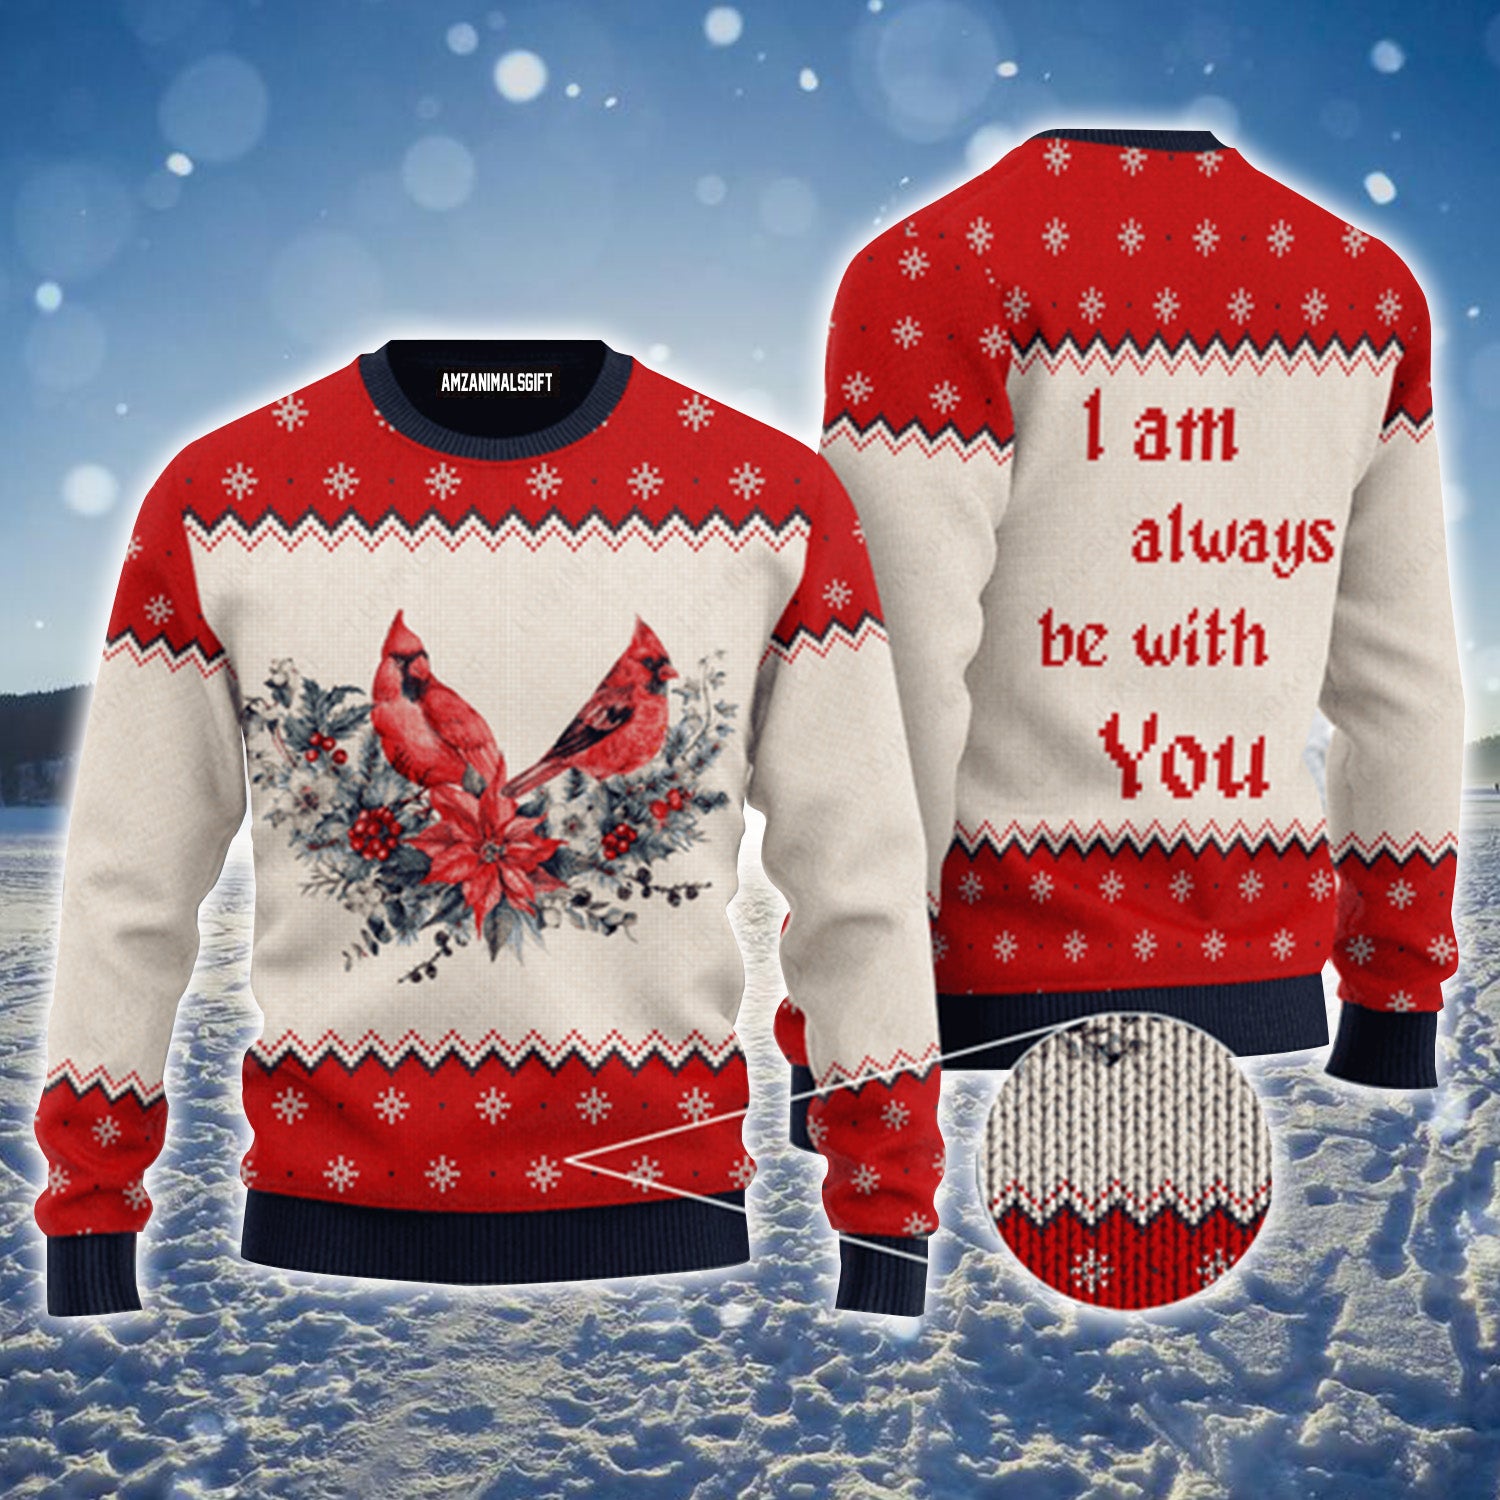 Christmas Snow Cardinal Wool Knitted Pattern Urly Sweater, Christmas Sweater For Men & Women - Perfect Gift For Christmas, New Year, Winter